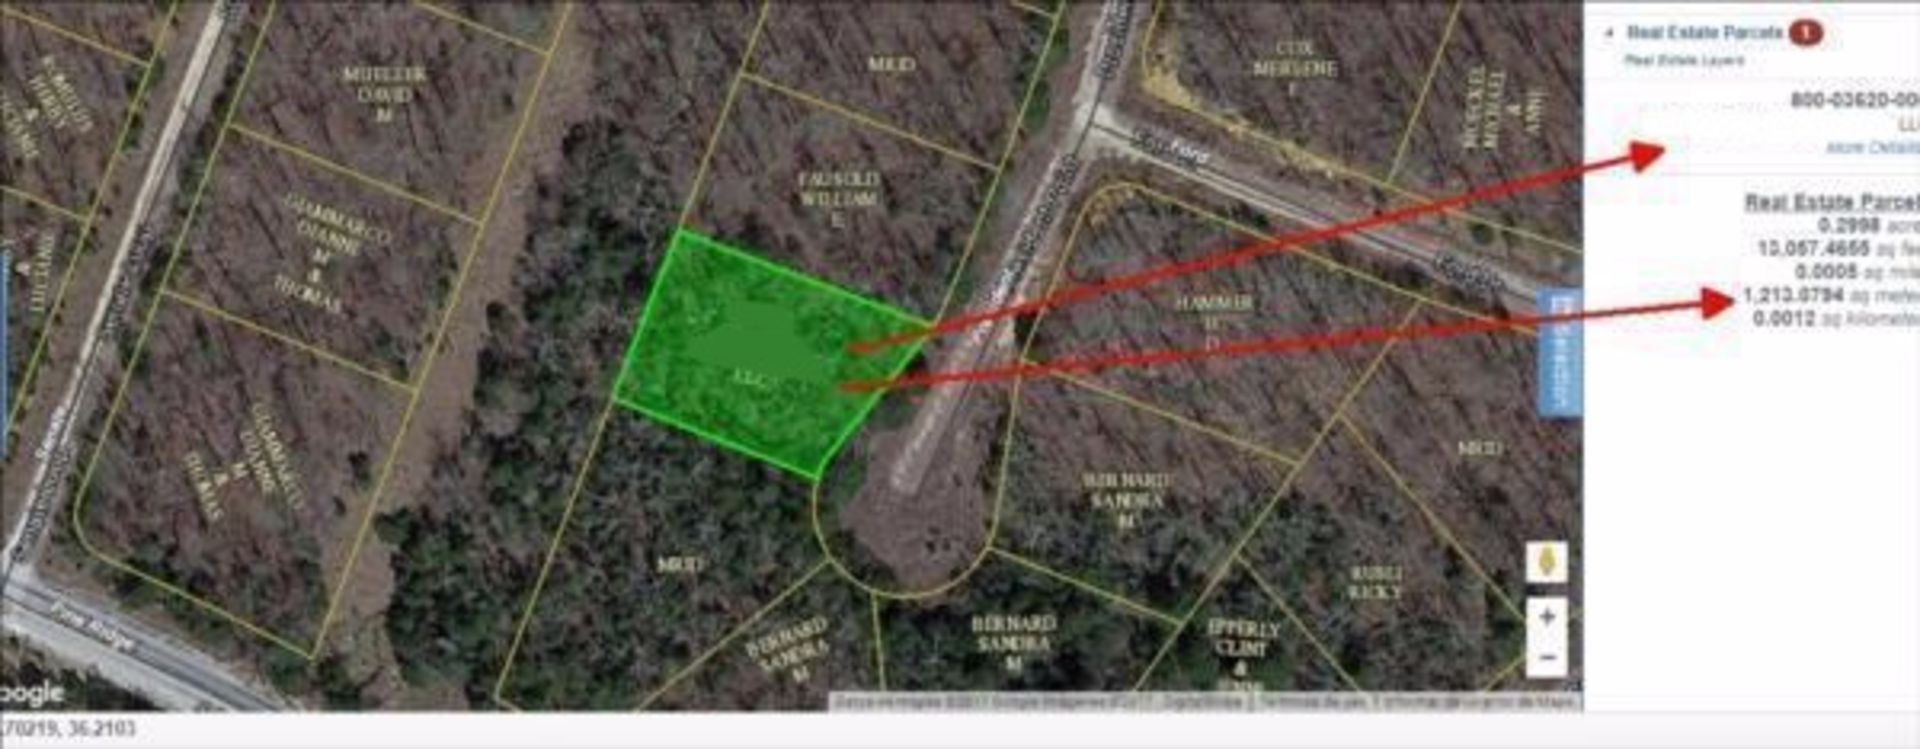 PLOT OF RESIDENTIAL BUILDING LAND, 0.308 ACRES IN HORSESHOE BEND, 72512, ARKANSAS EXECUTIVE ADDITION - Image 5 of 5